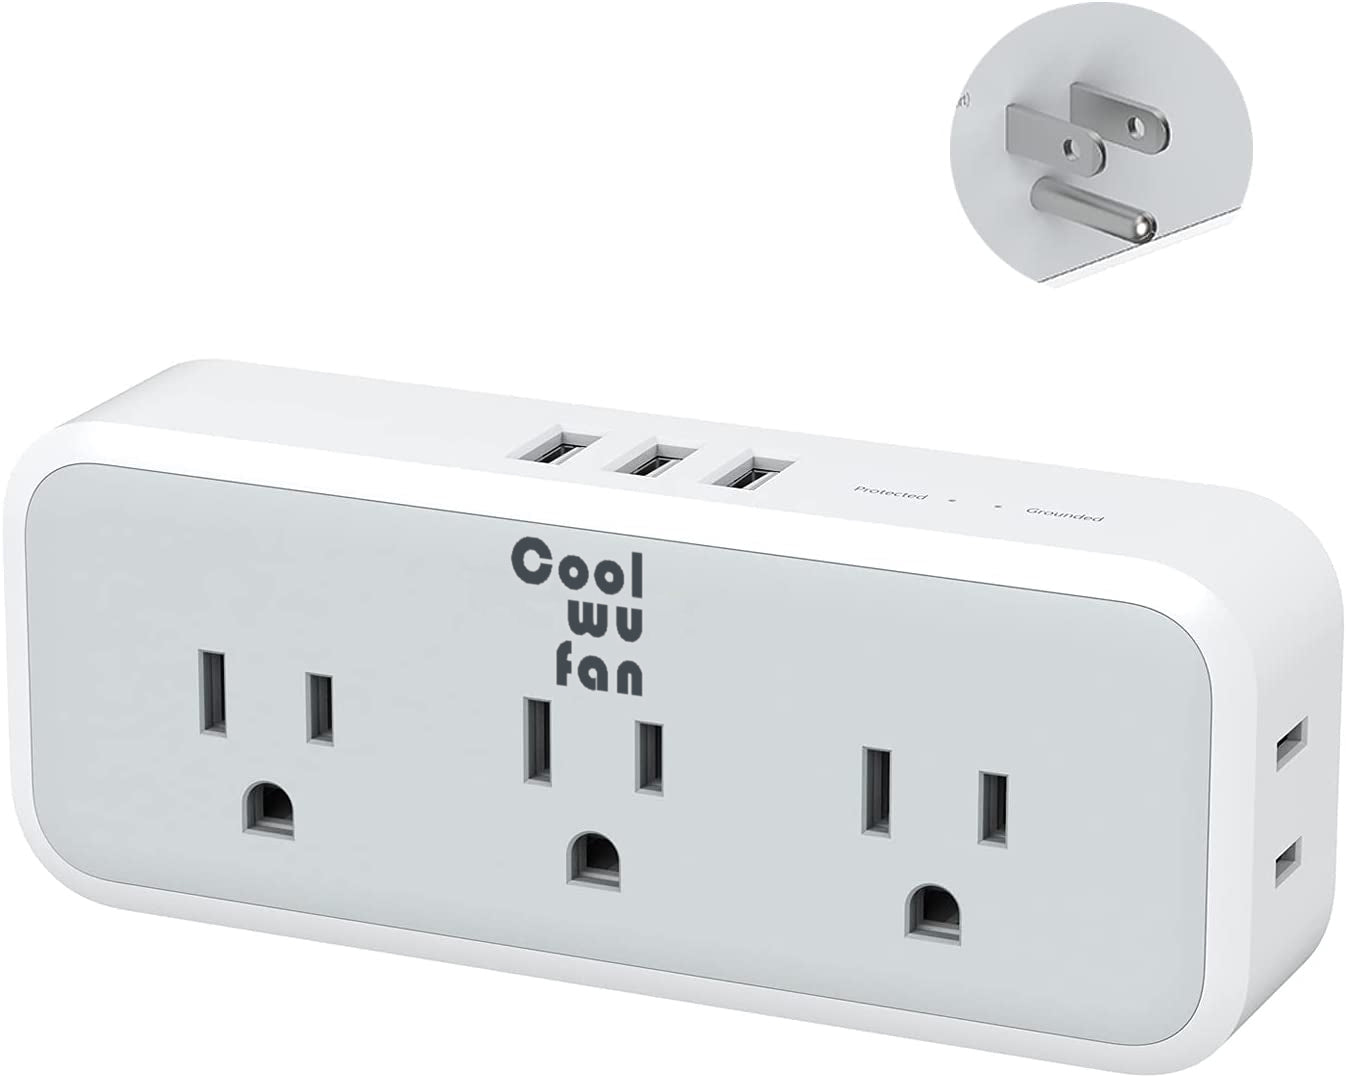 COOLWUFAN Multi Plug Outlet Splitter with USB, 5 Electrical Outlet Extender Surge Protector with 3 USB Wall Charger, Multiple Plug Expander for Home Office Dorm Room Essentials